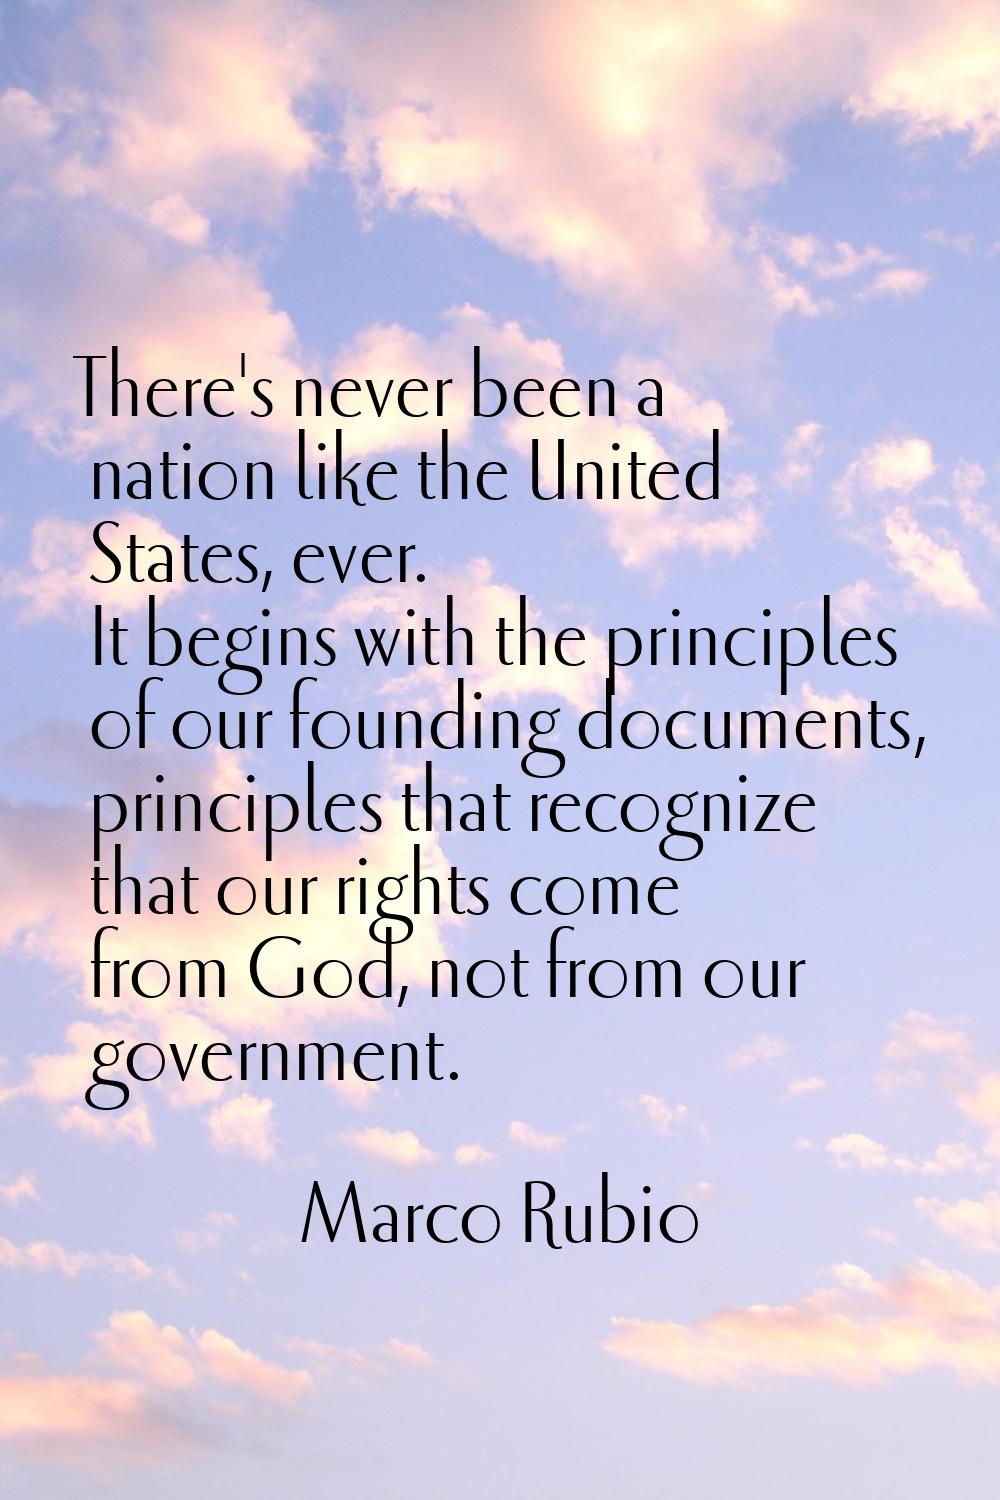 There's never been a nation like the United States, ever. It begins with the principles of our foun